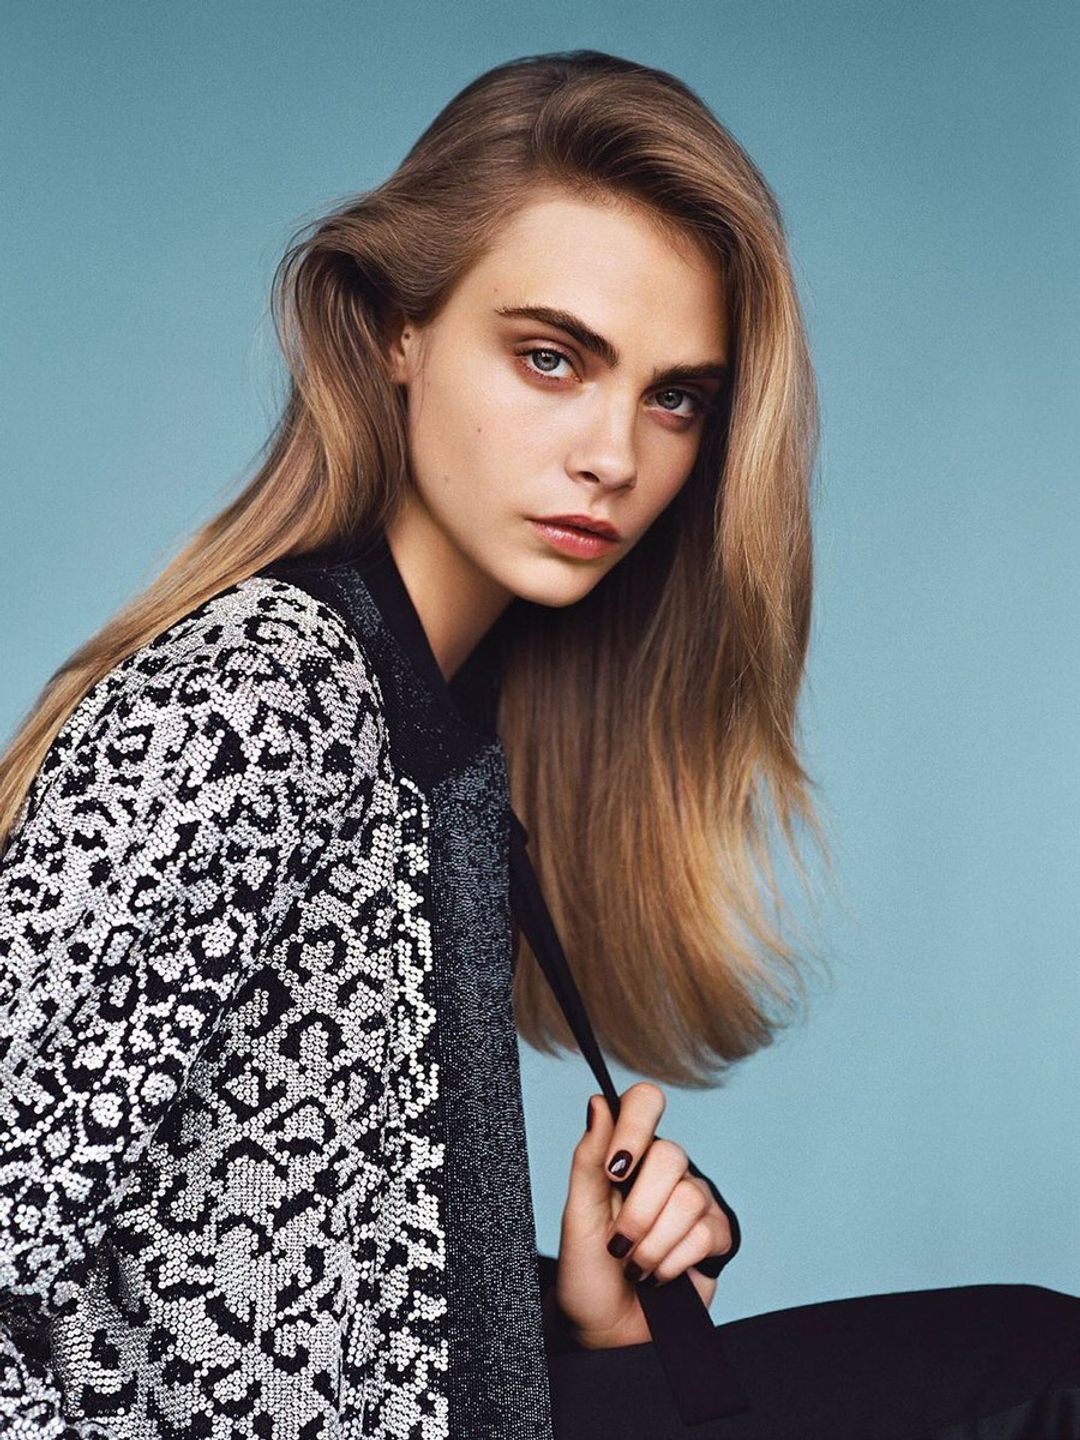 Cara Delevingne how did she became famous